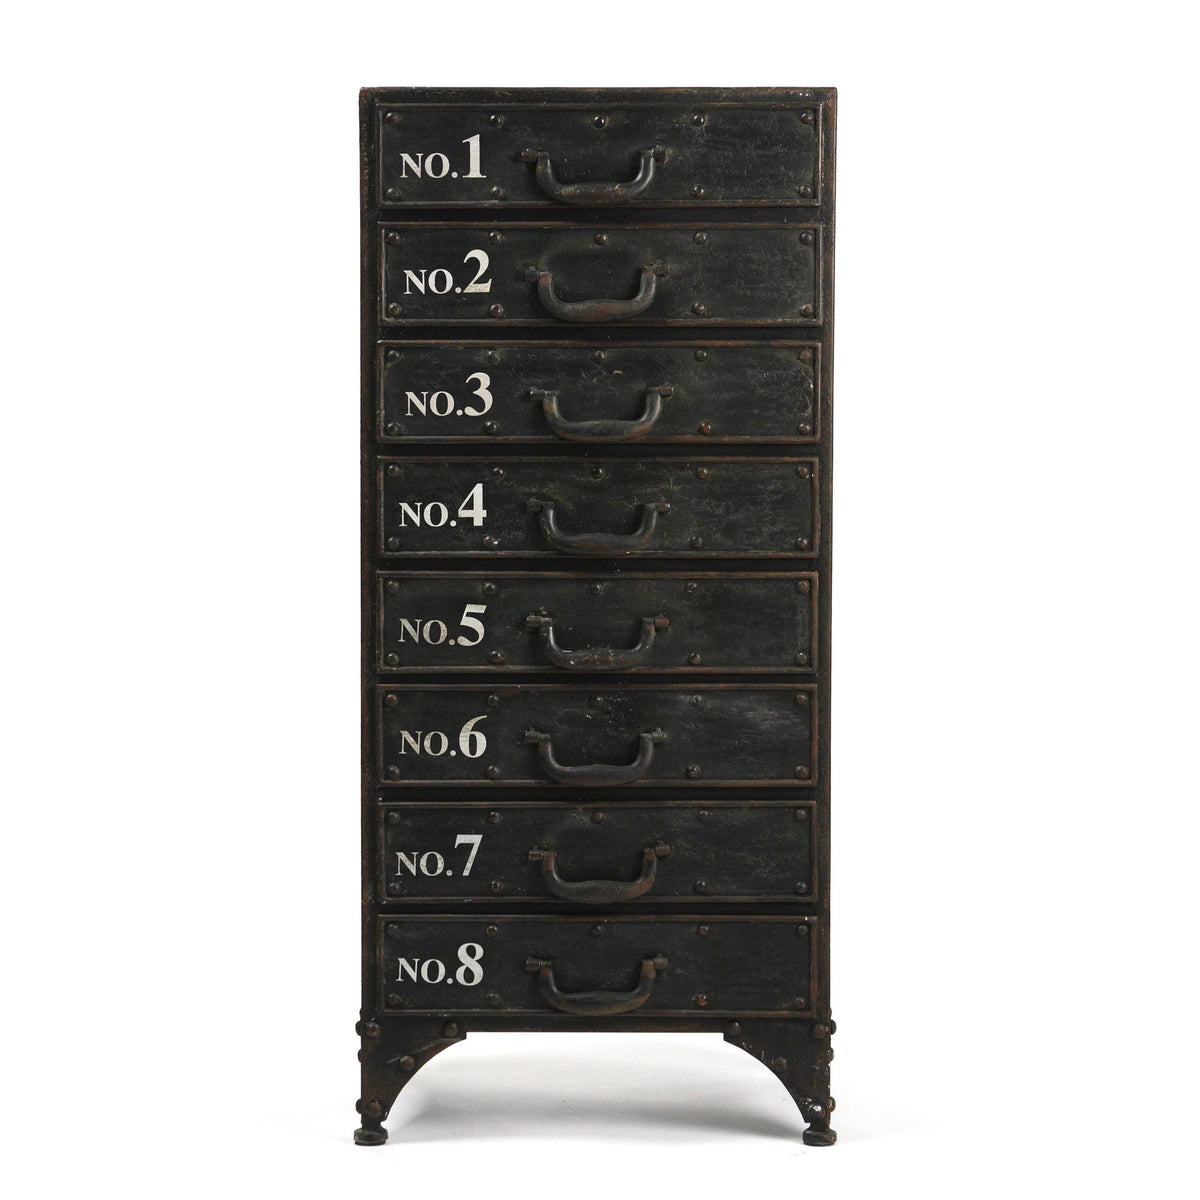 Andre Iron Cabinet by Zentique